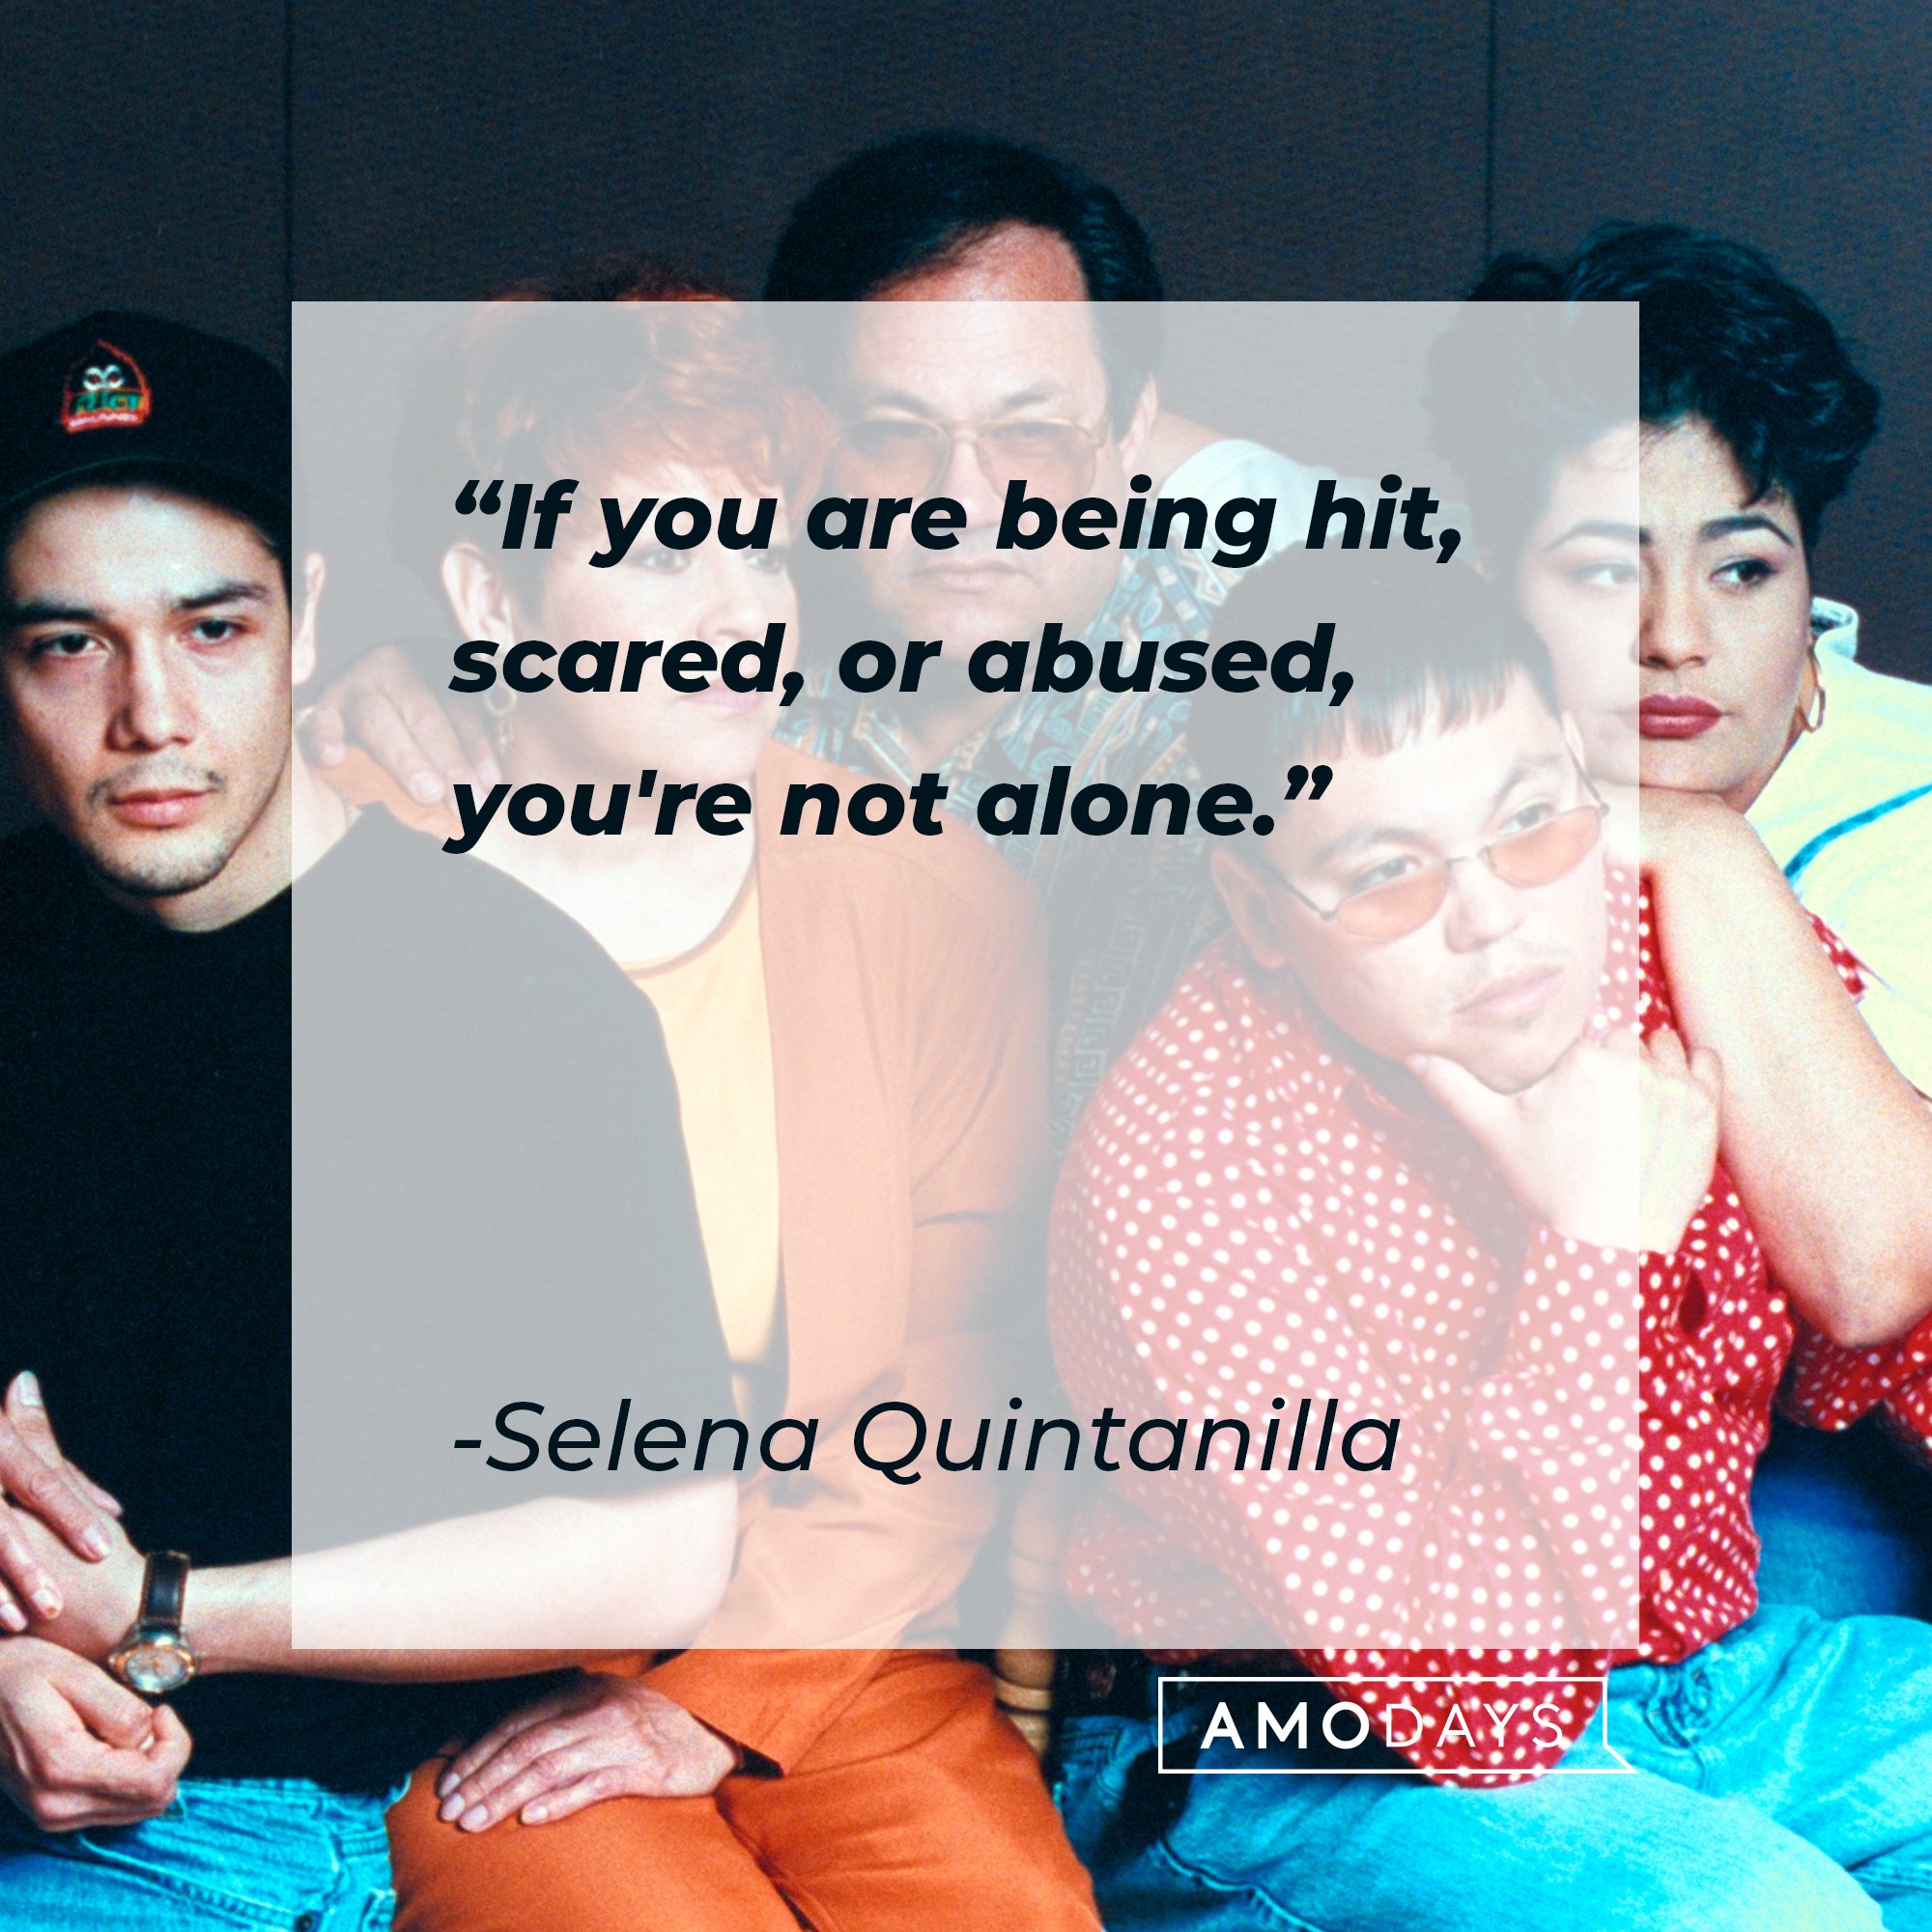 Selena Quintanilla's quote: "If you are being hit, scared, or abused, you're not alone." | Image: AmoDays